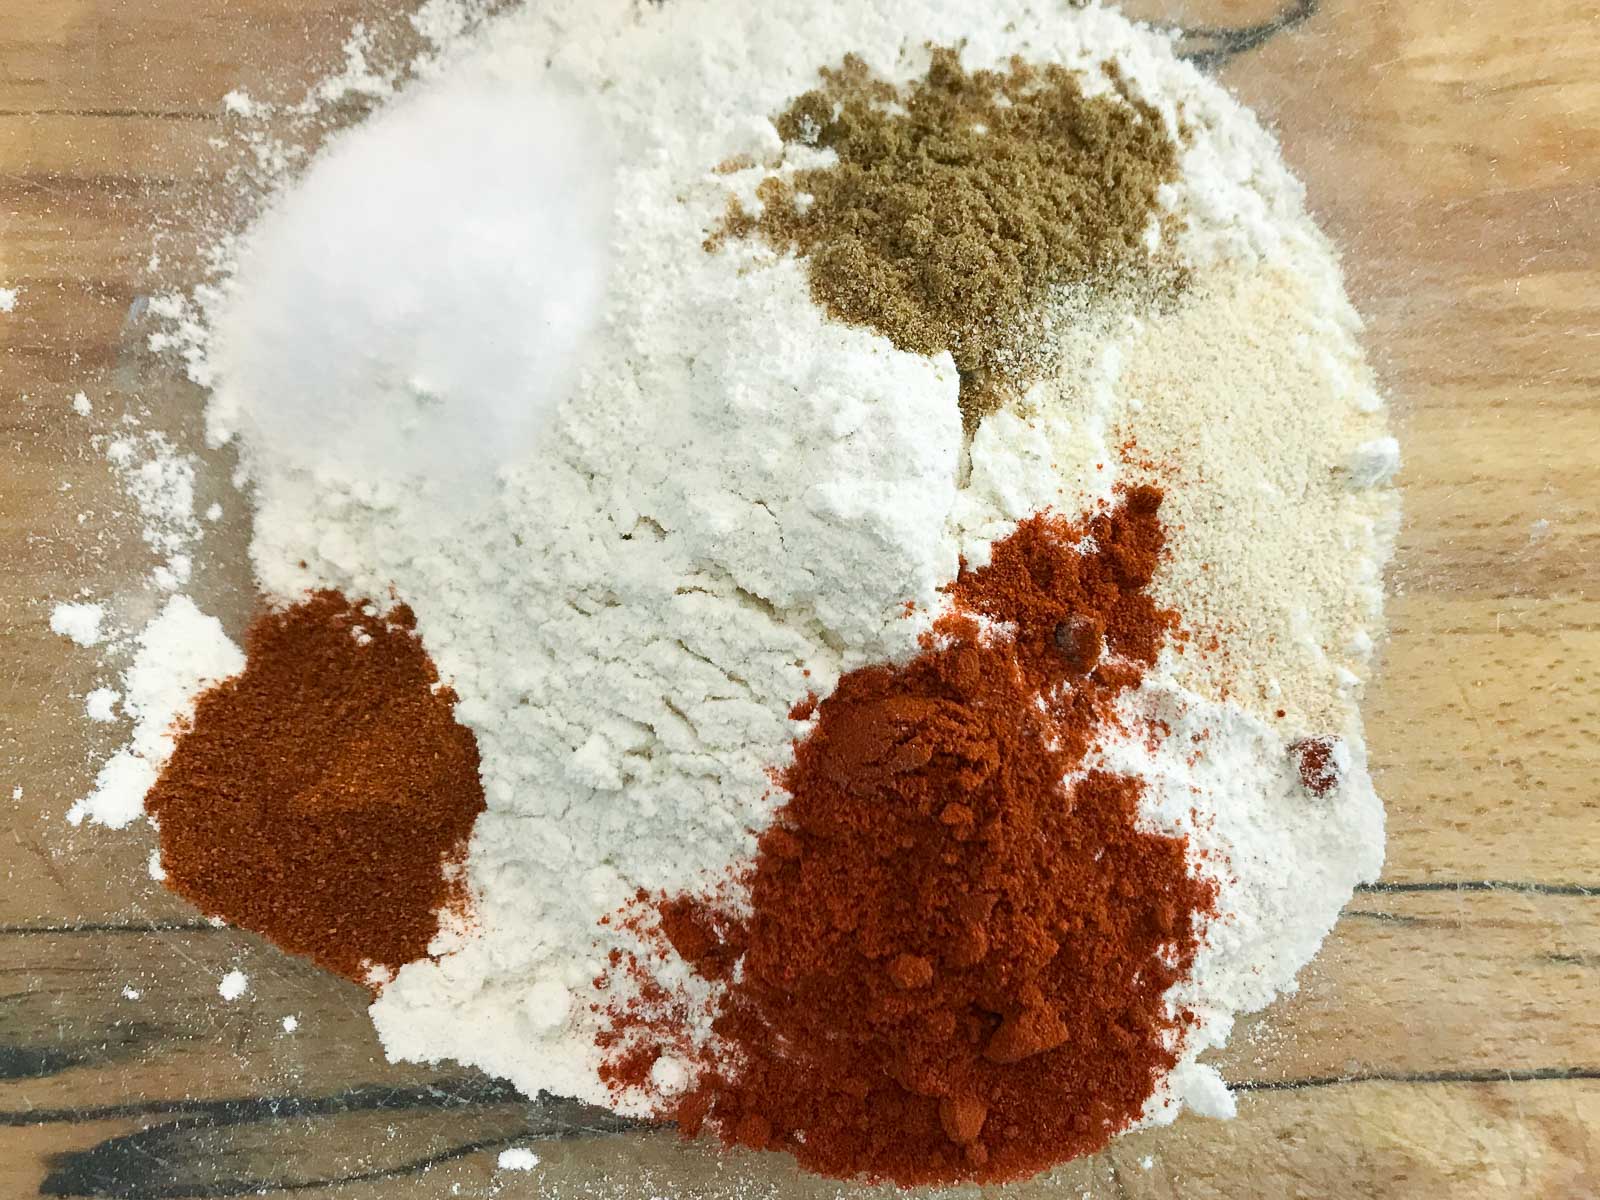 Flour and seasonings to prepare the batter for onion rings in a glass bowl.